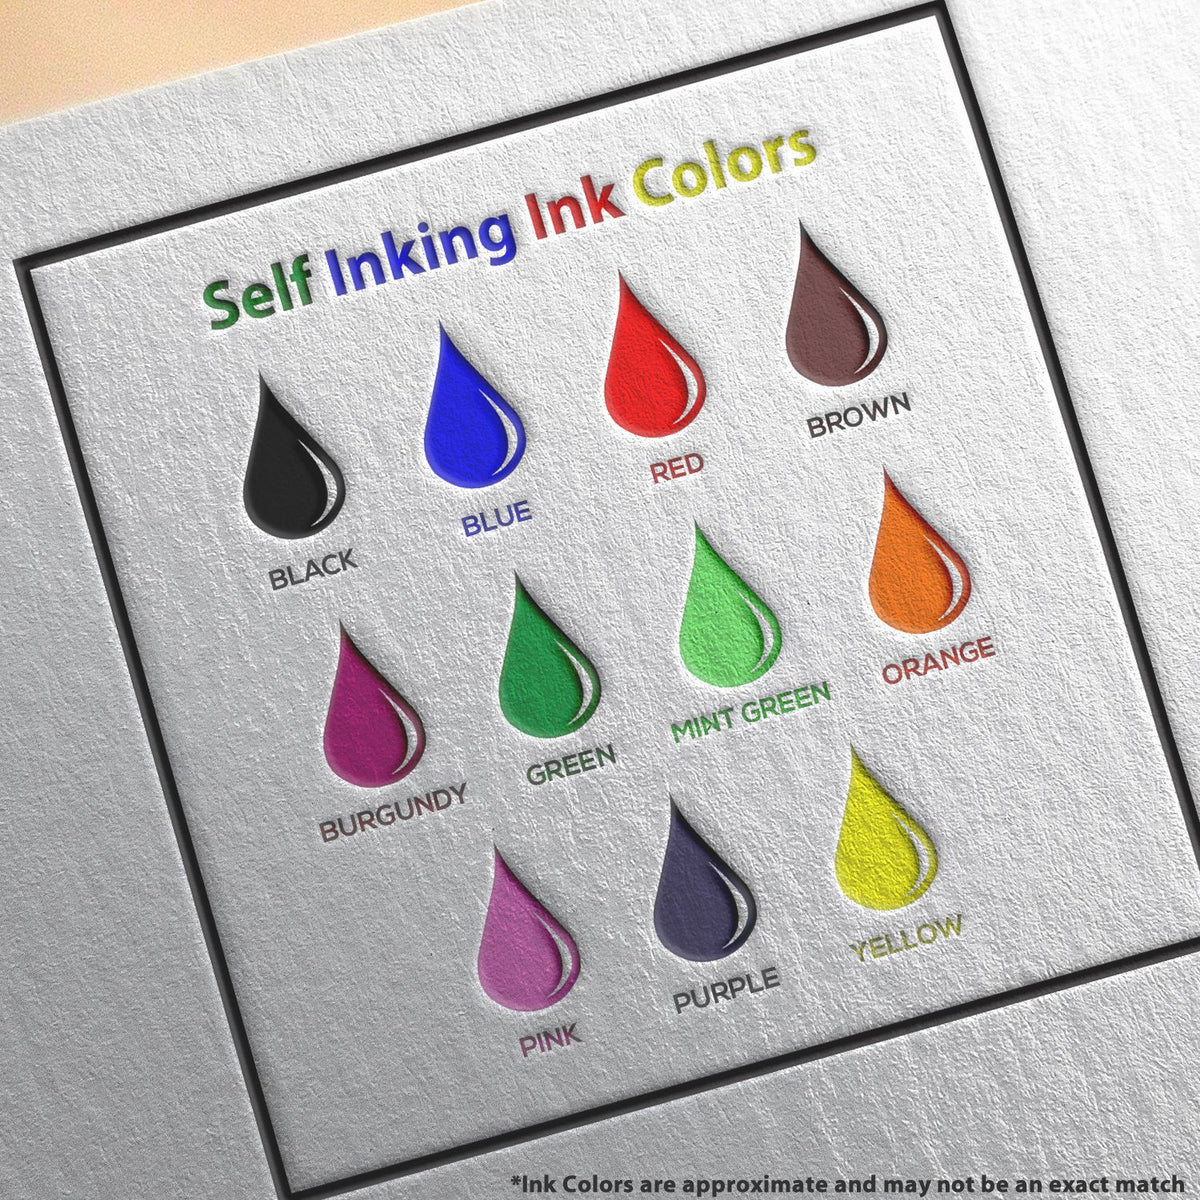 A picture showing the different ink colors or hues available for the Self-Inking Washington PE Stamp product.